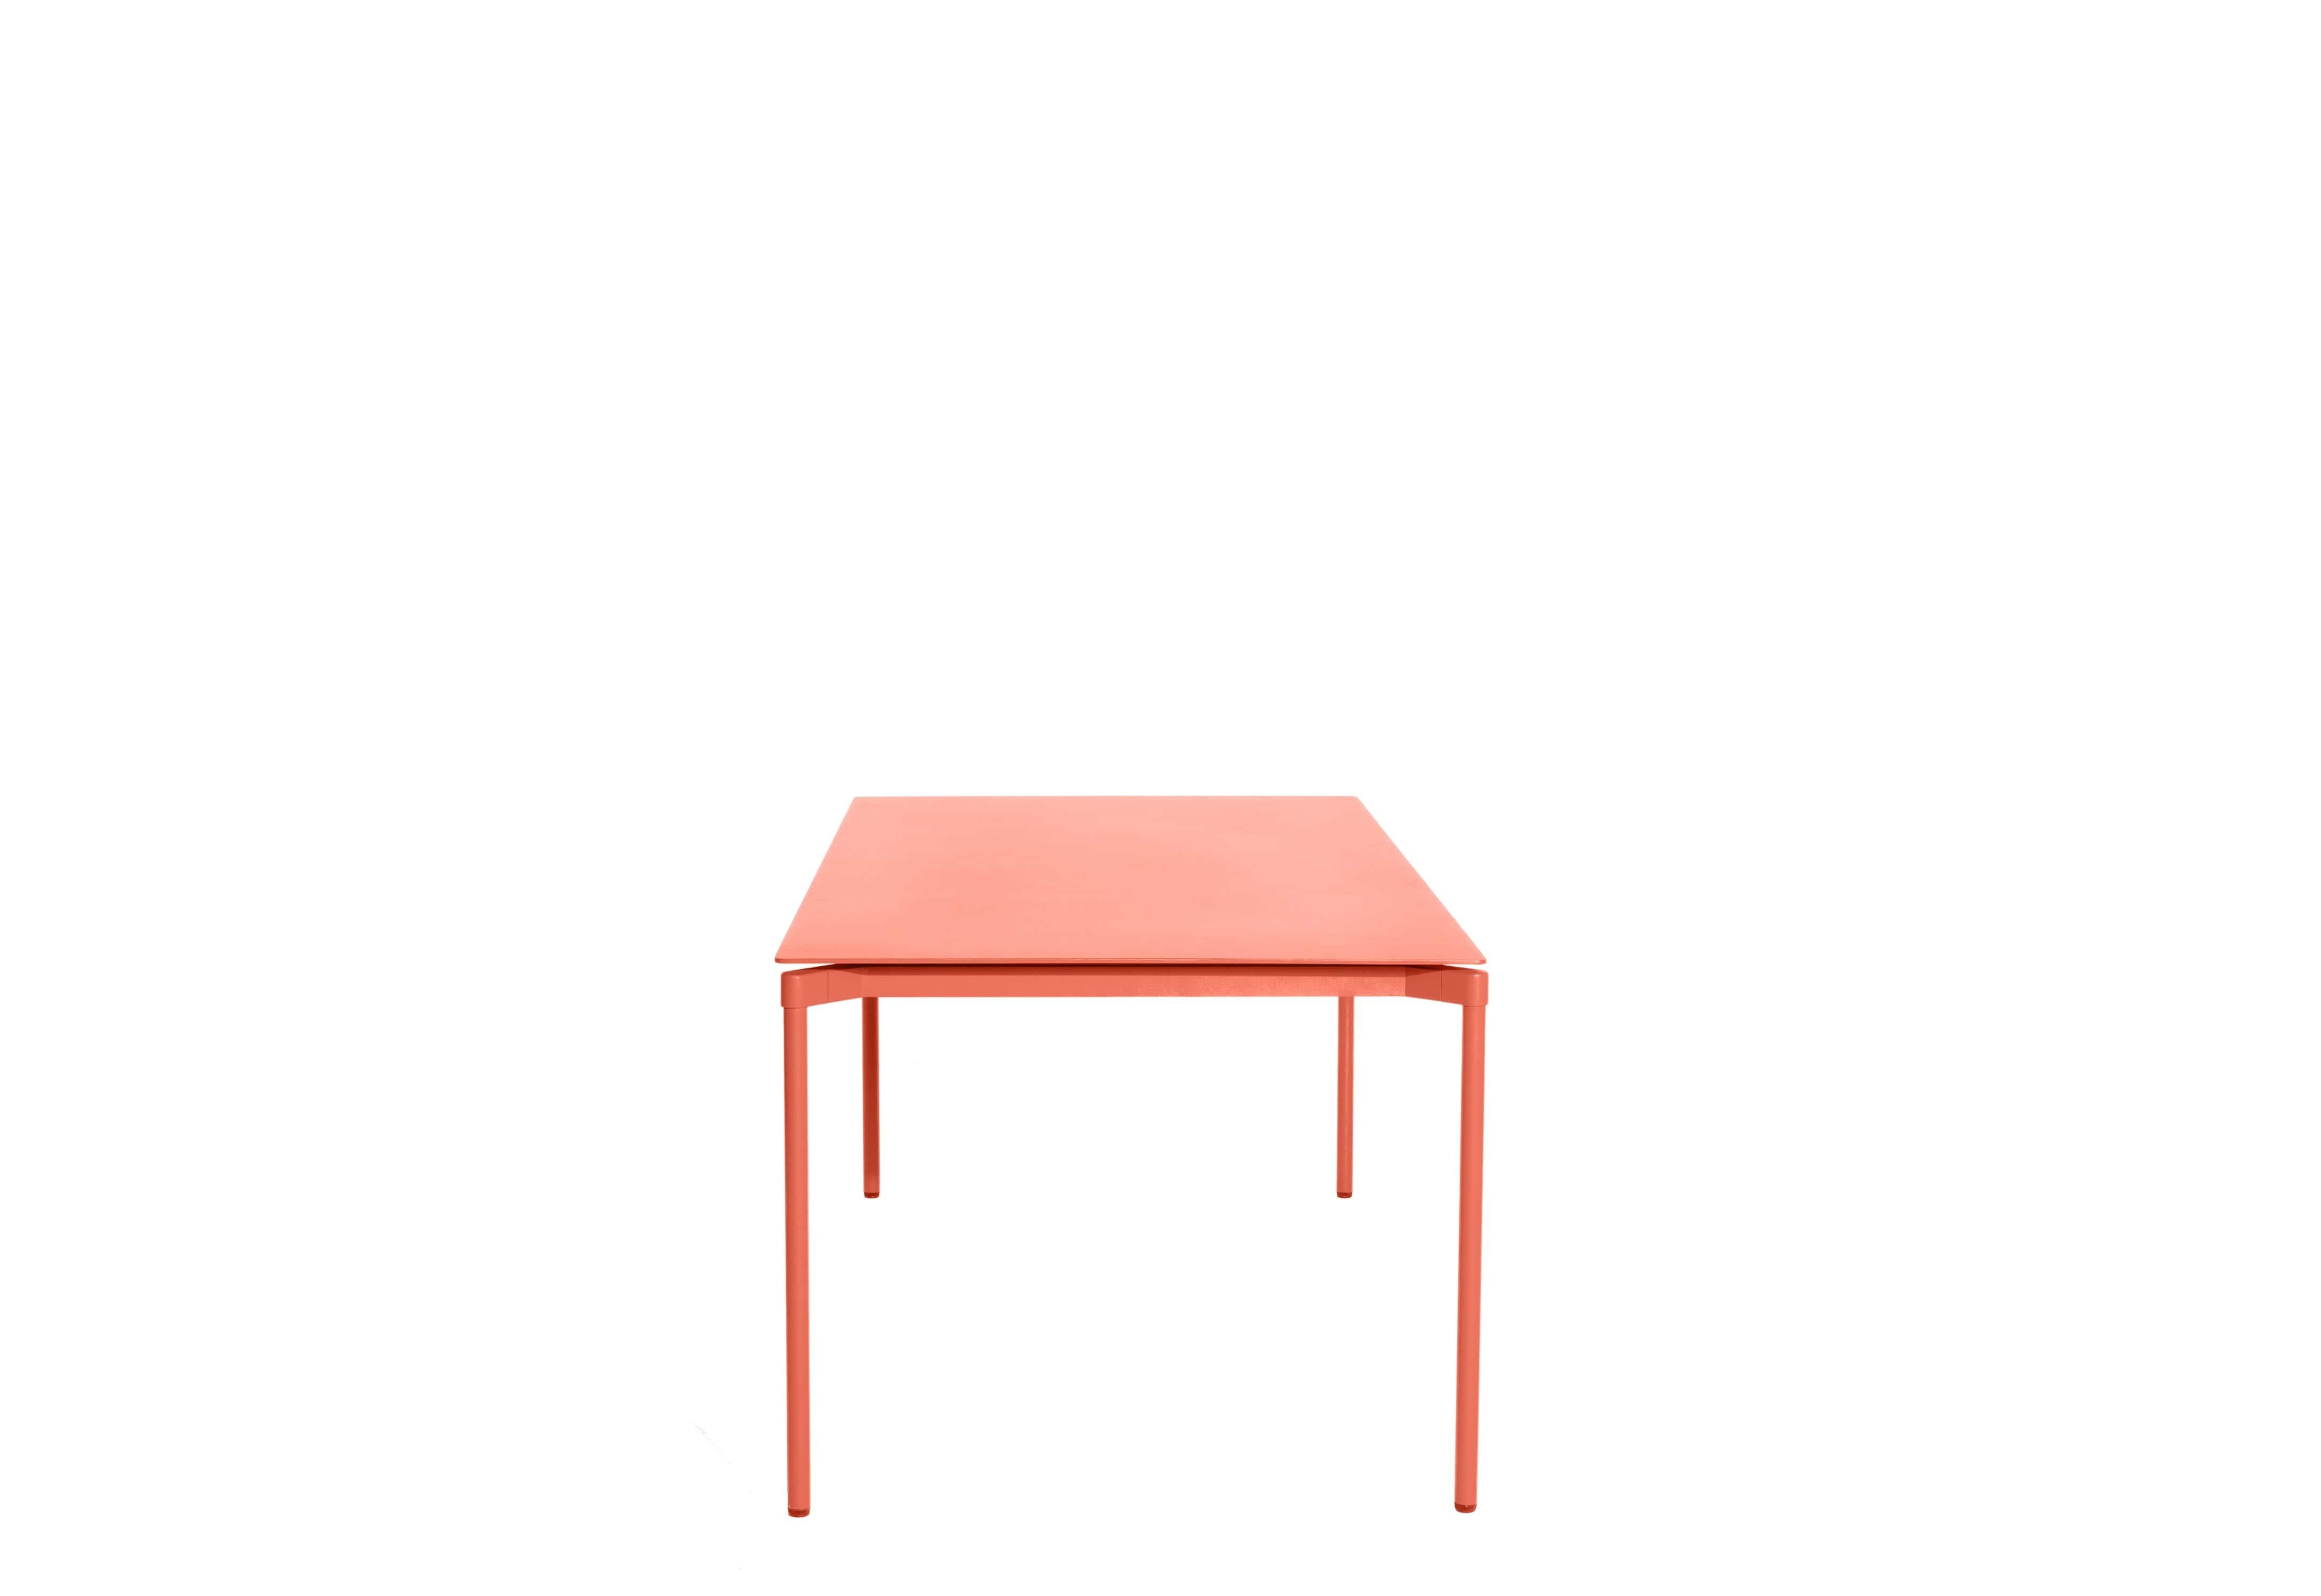 Chinese Petite Friture Fromme Rectangular Table in Coral Aluminium by Tom Chung For Sale